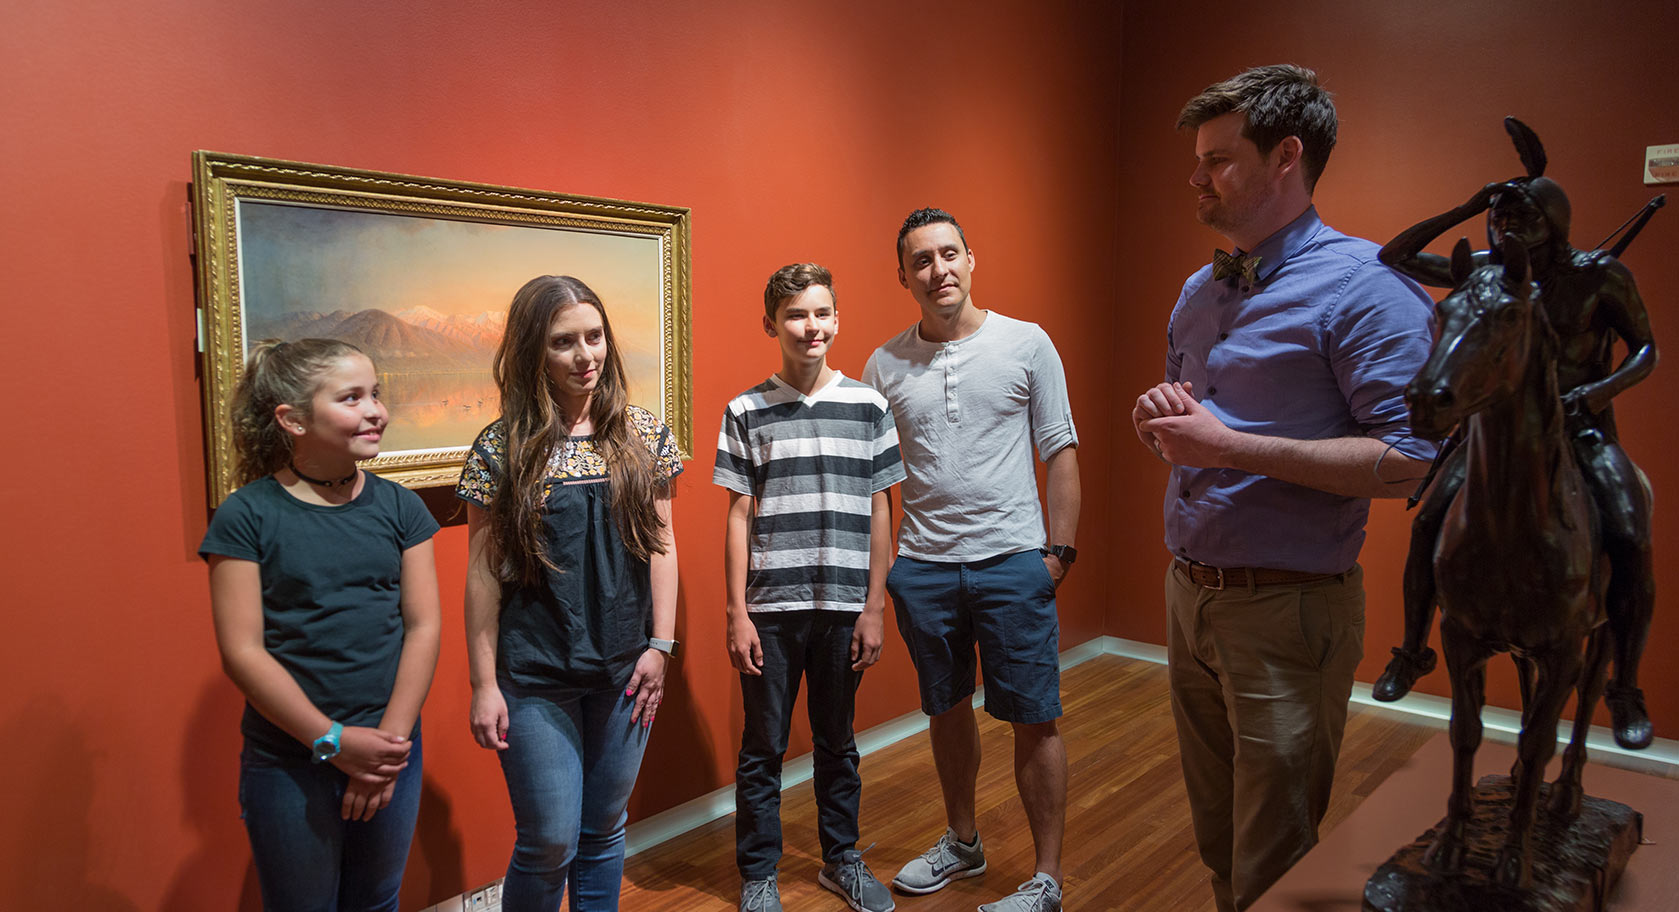 A teacher and a group of students have a discussion in the gallery.